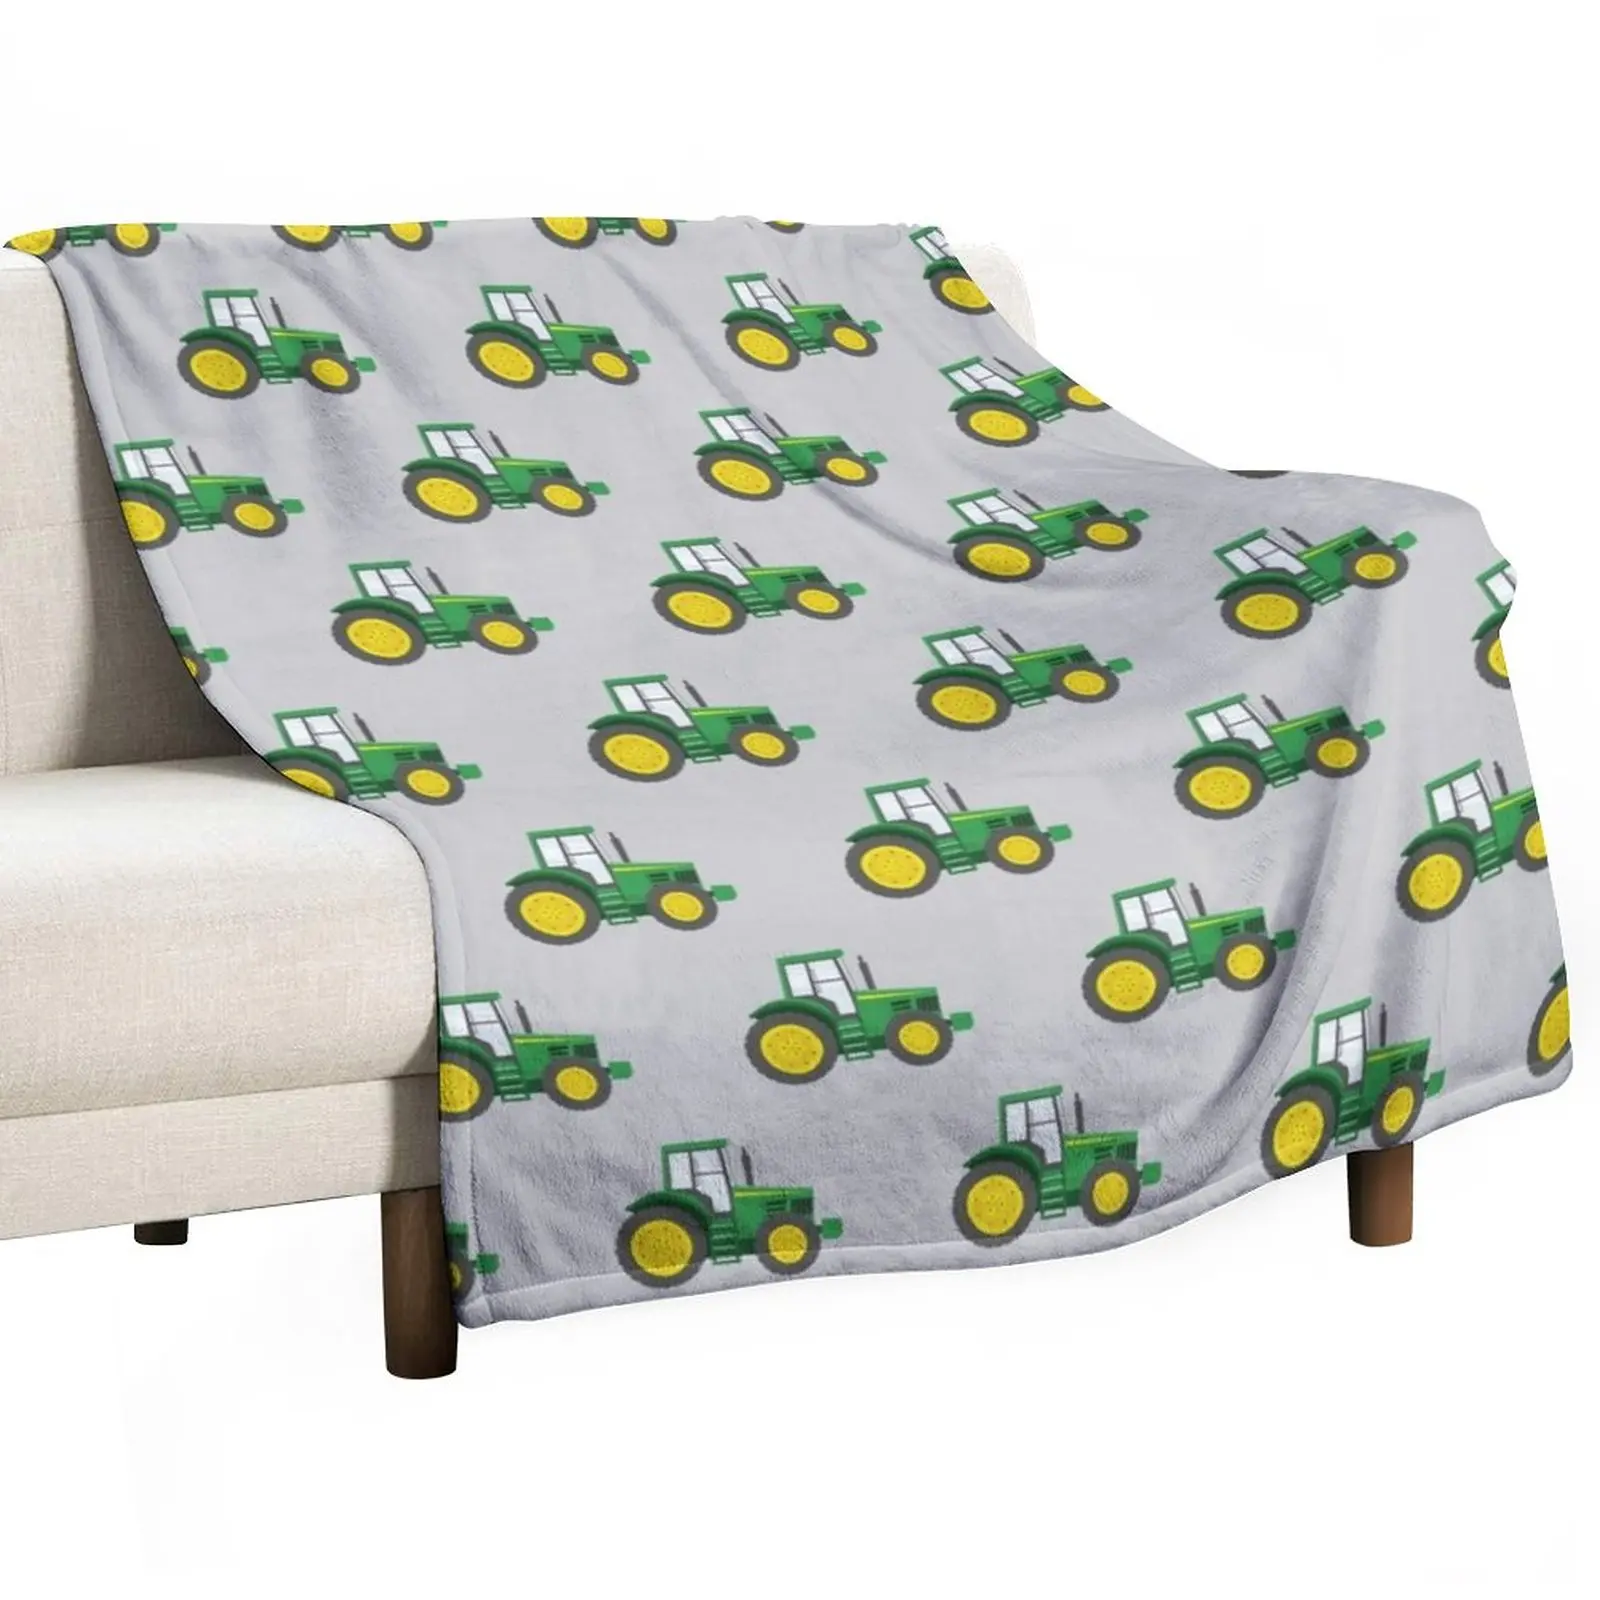 

Green Tractors on Grey - Farming - Farm Themed Throw Blanket Plaid on the sofa Quilt Blanket throw blanket for sofa wednesday